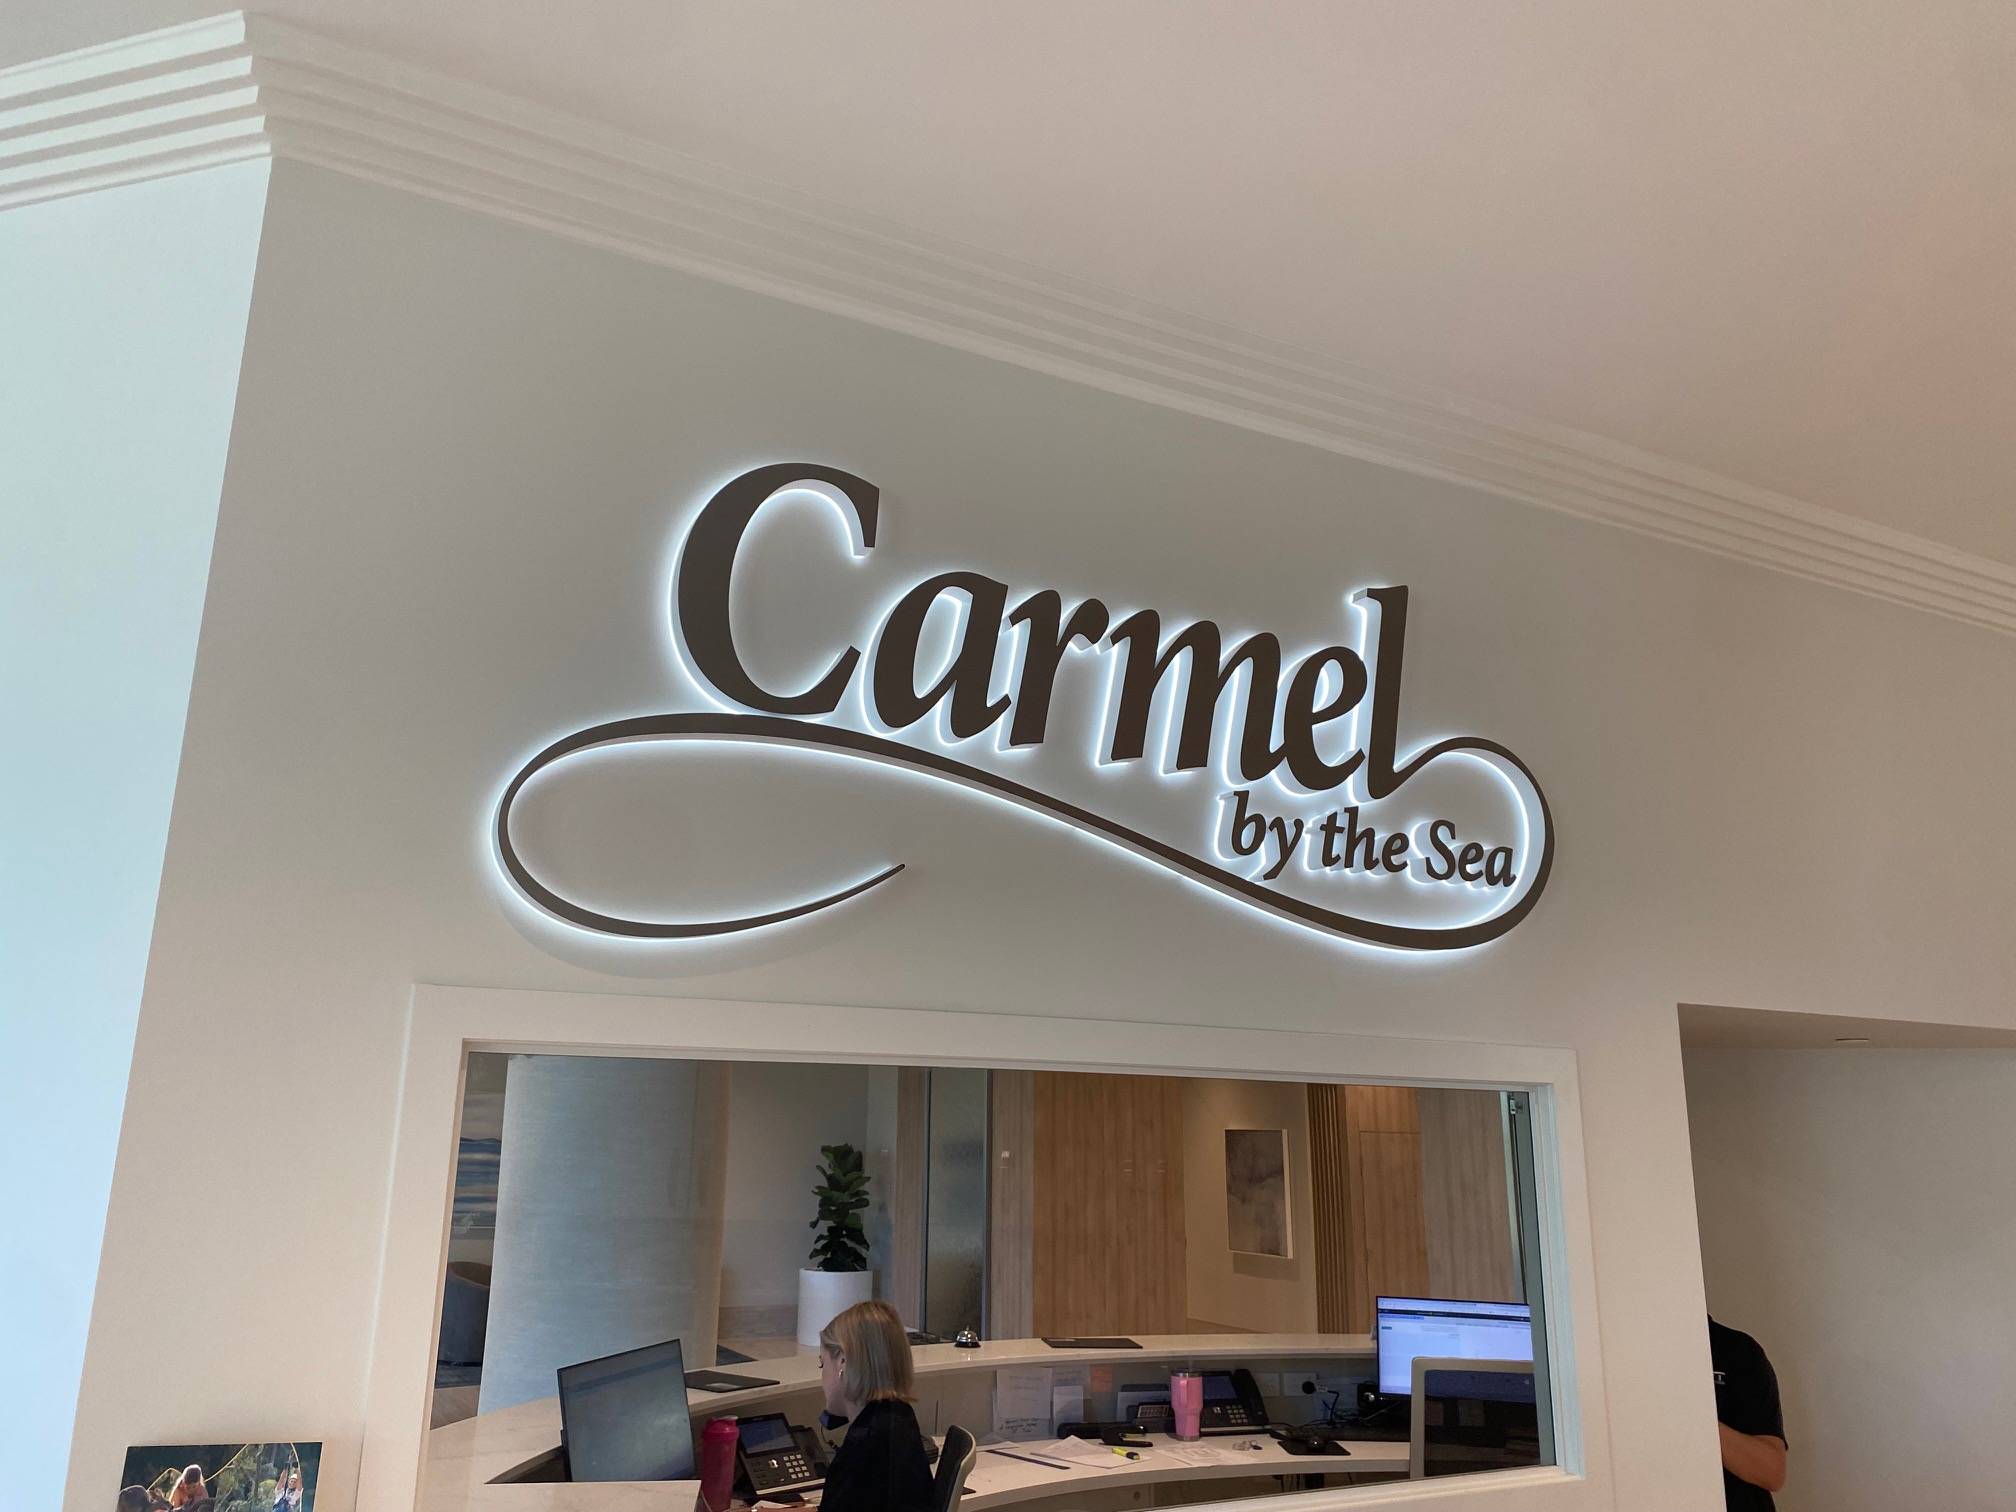 Carmel by the sea 3D printed sign